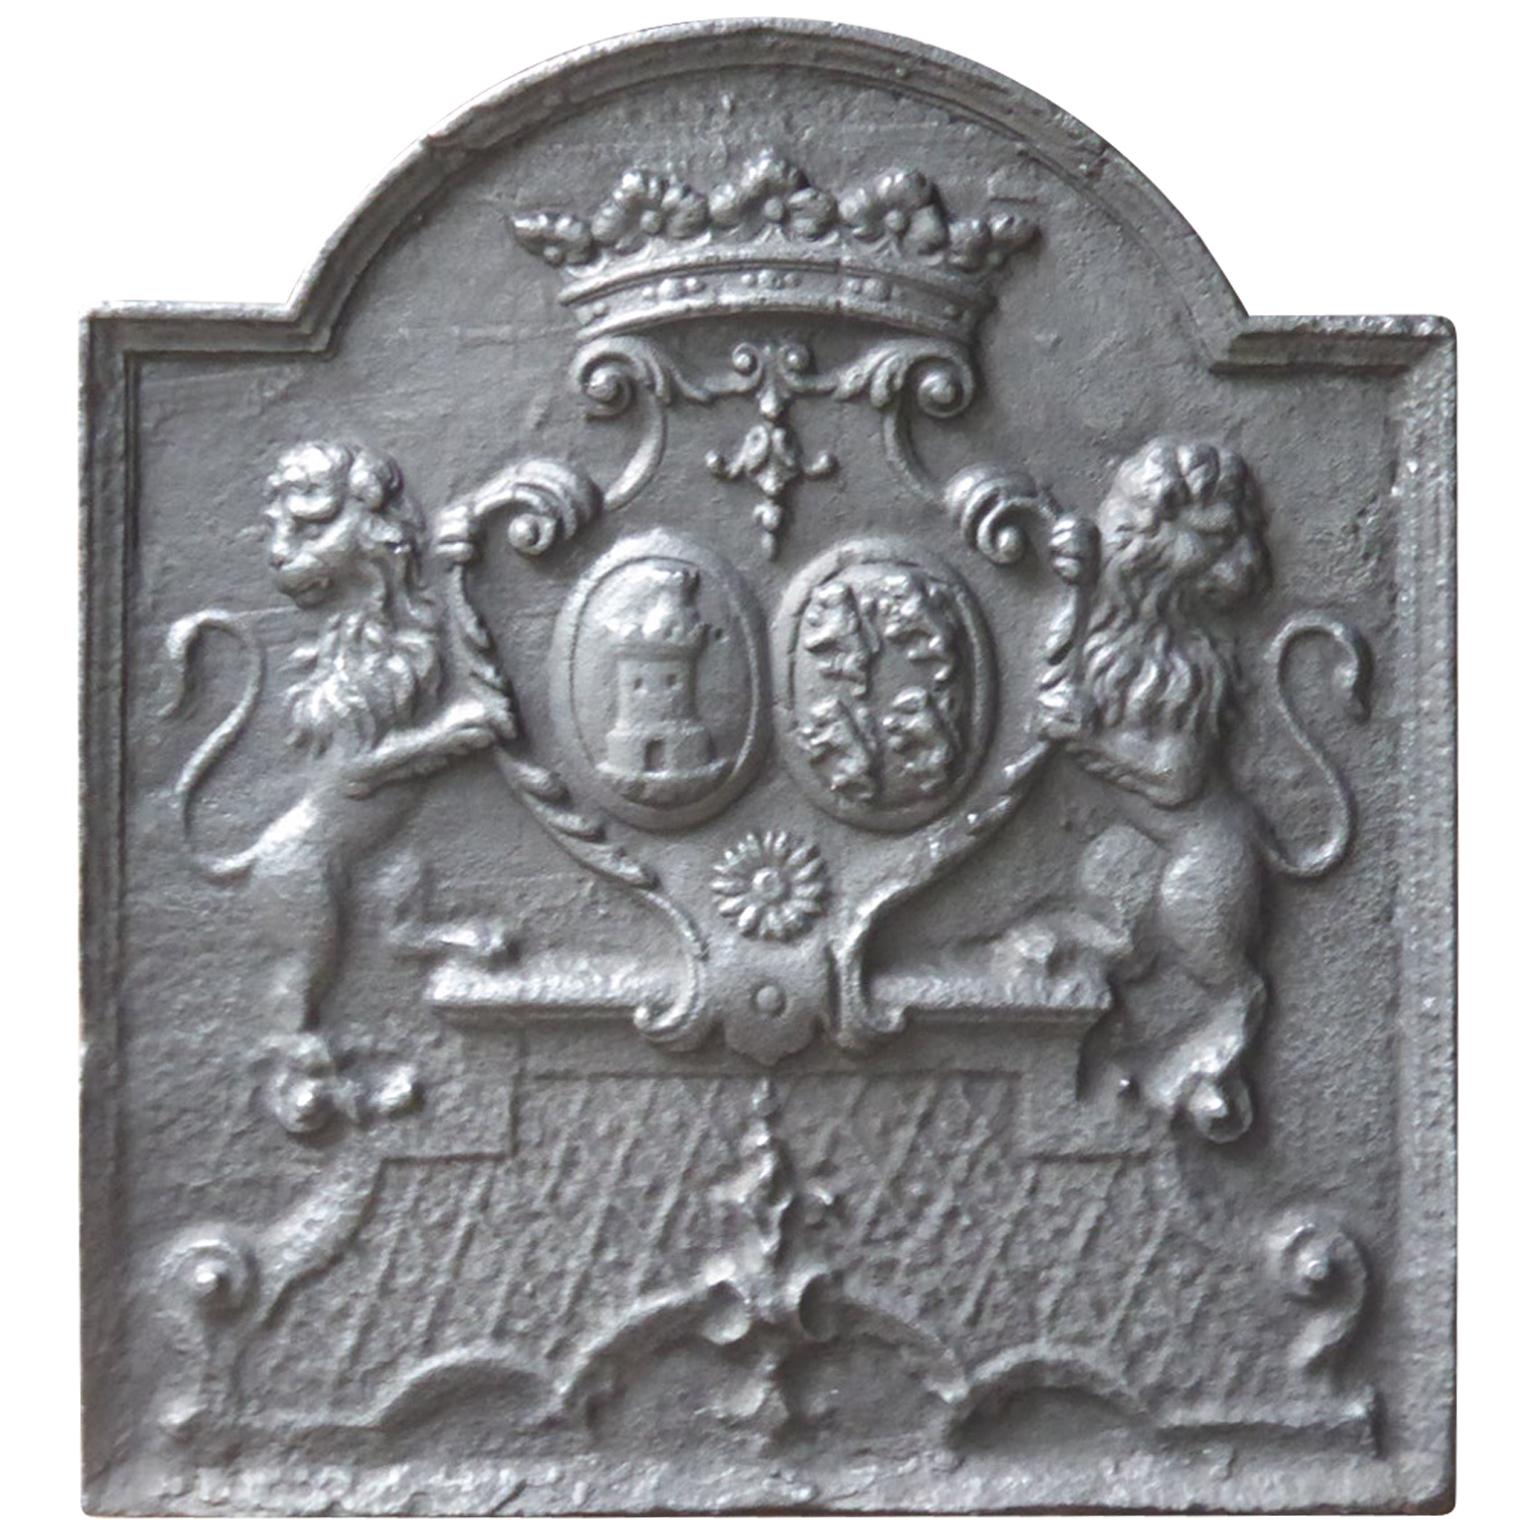 Fireback with Coat of Arms of the Des Salles - Beauvau Alliance, 18th Century